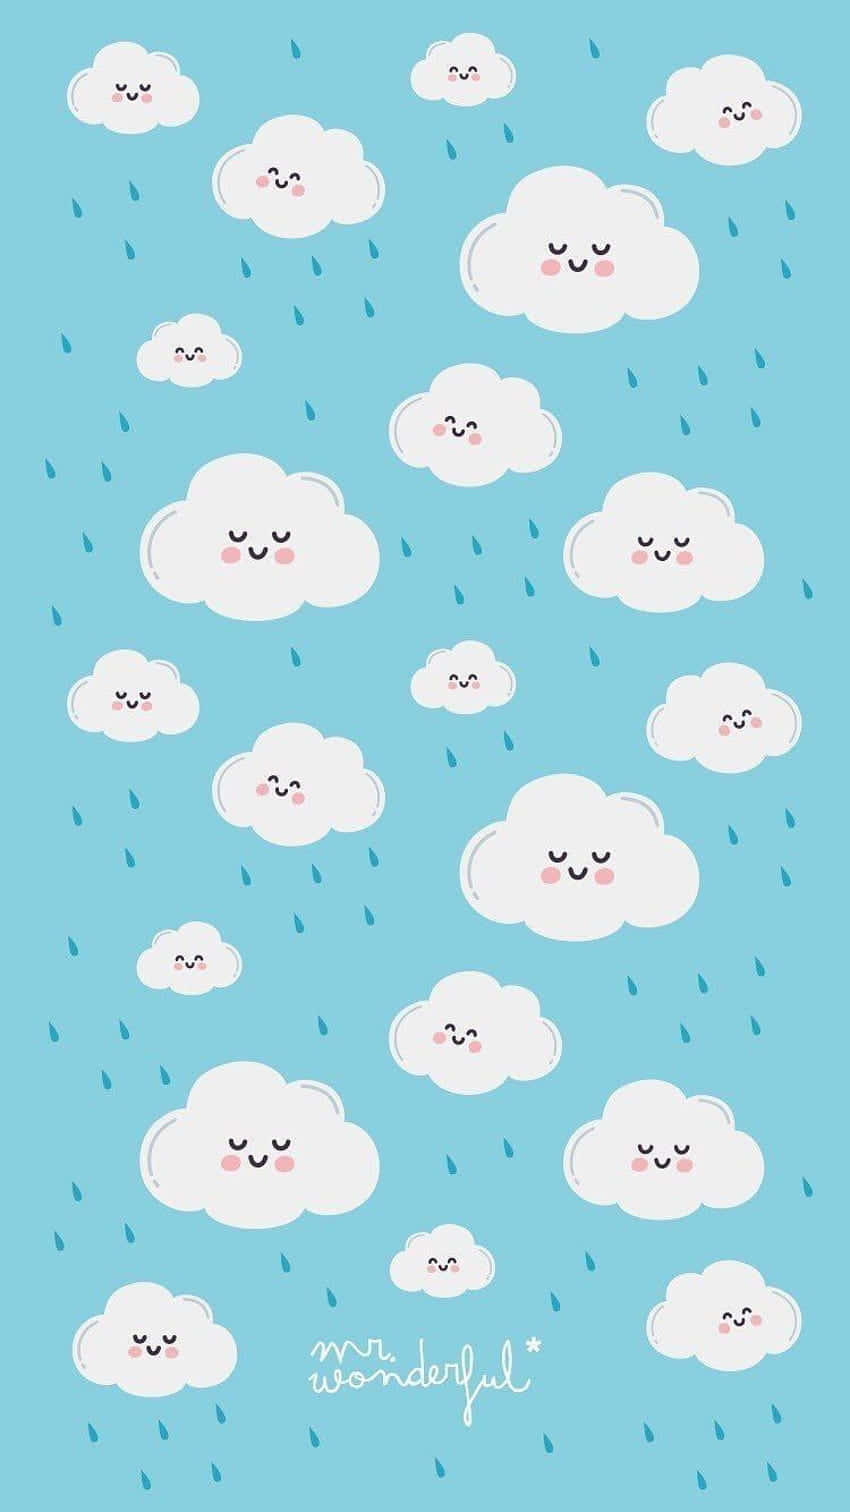 Download Cute Clouds With Faces Wallpaper